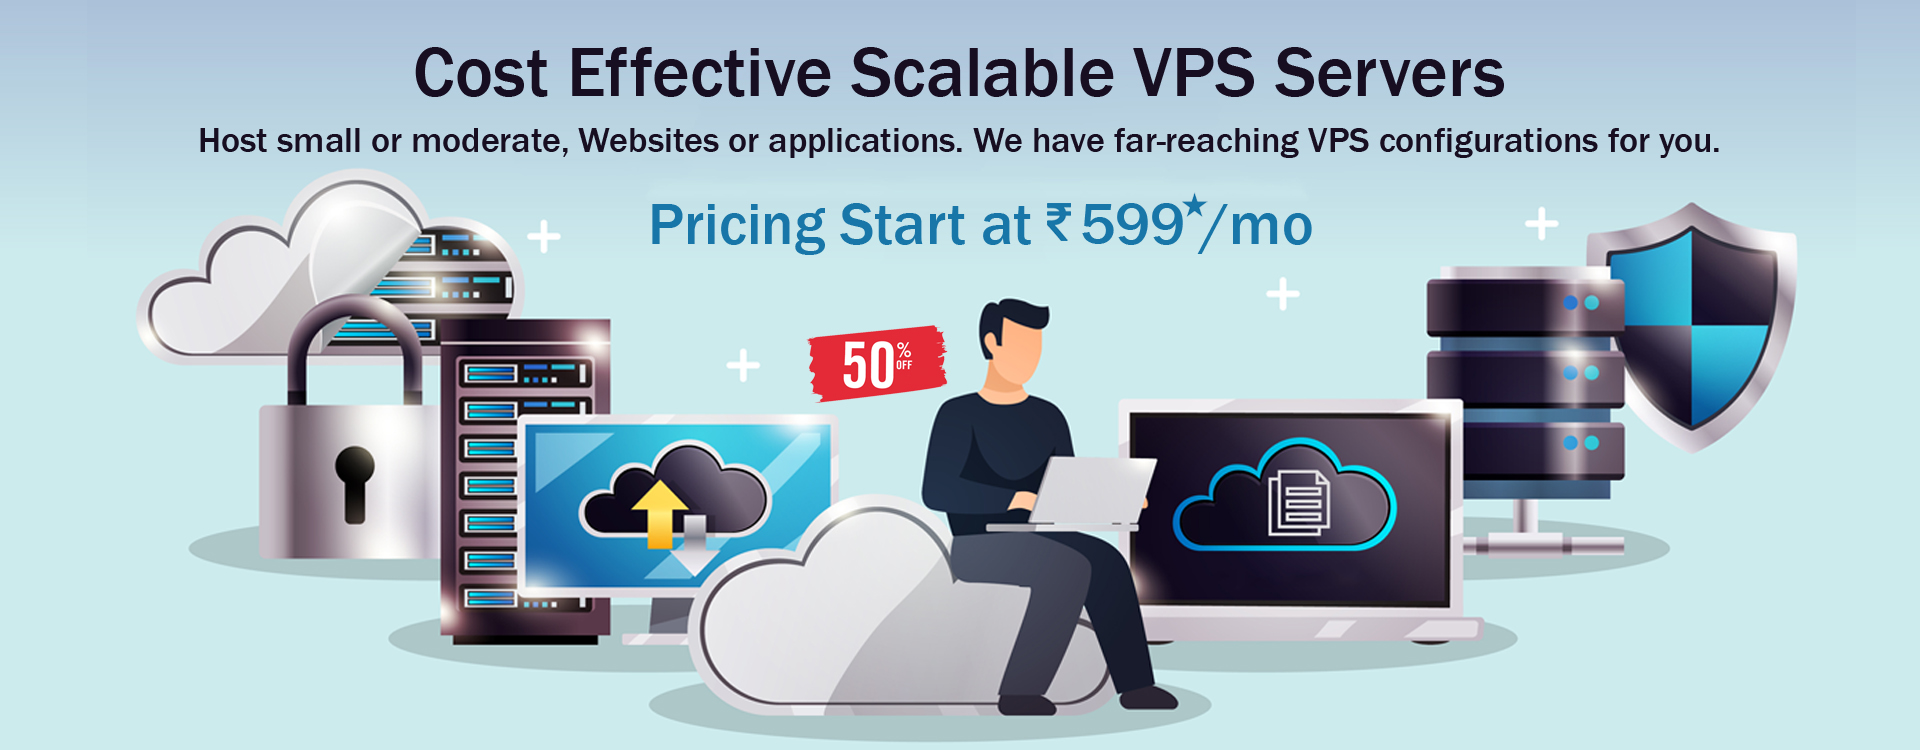 Get cost effective scalable VPS servers